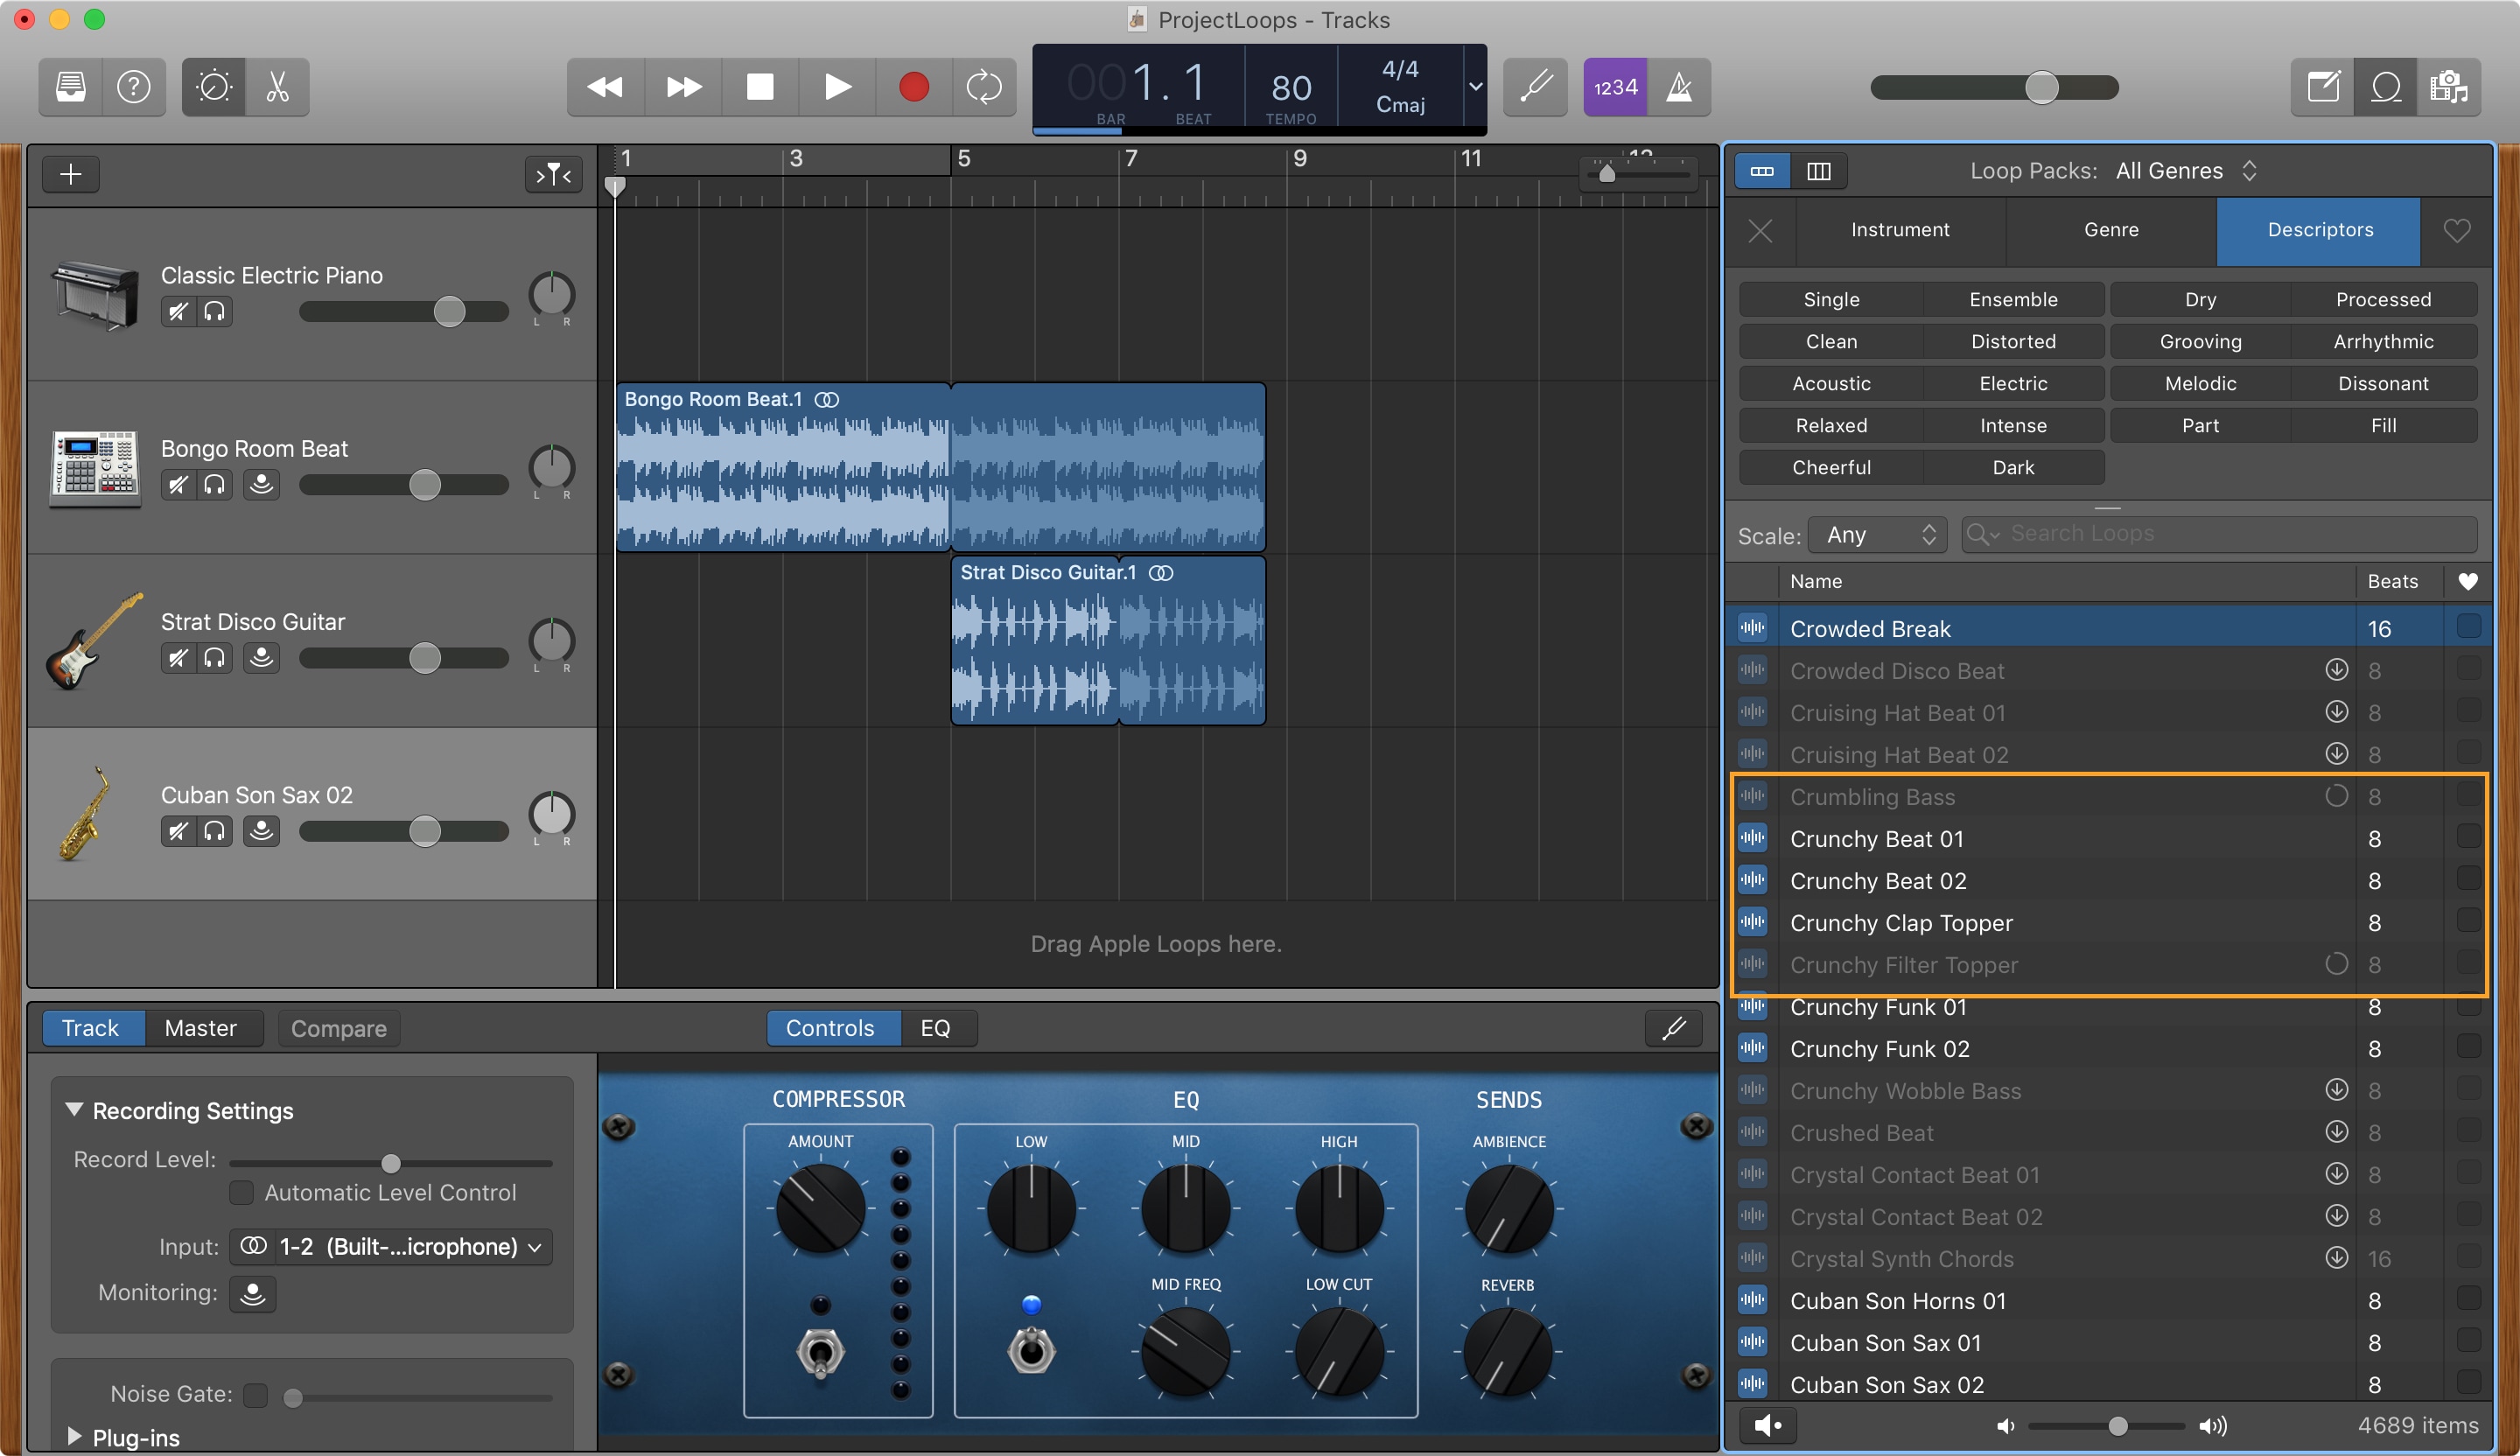 How to download and add Apple Loops to songs in GarageBand